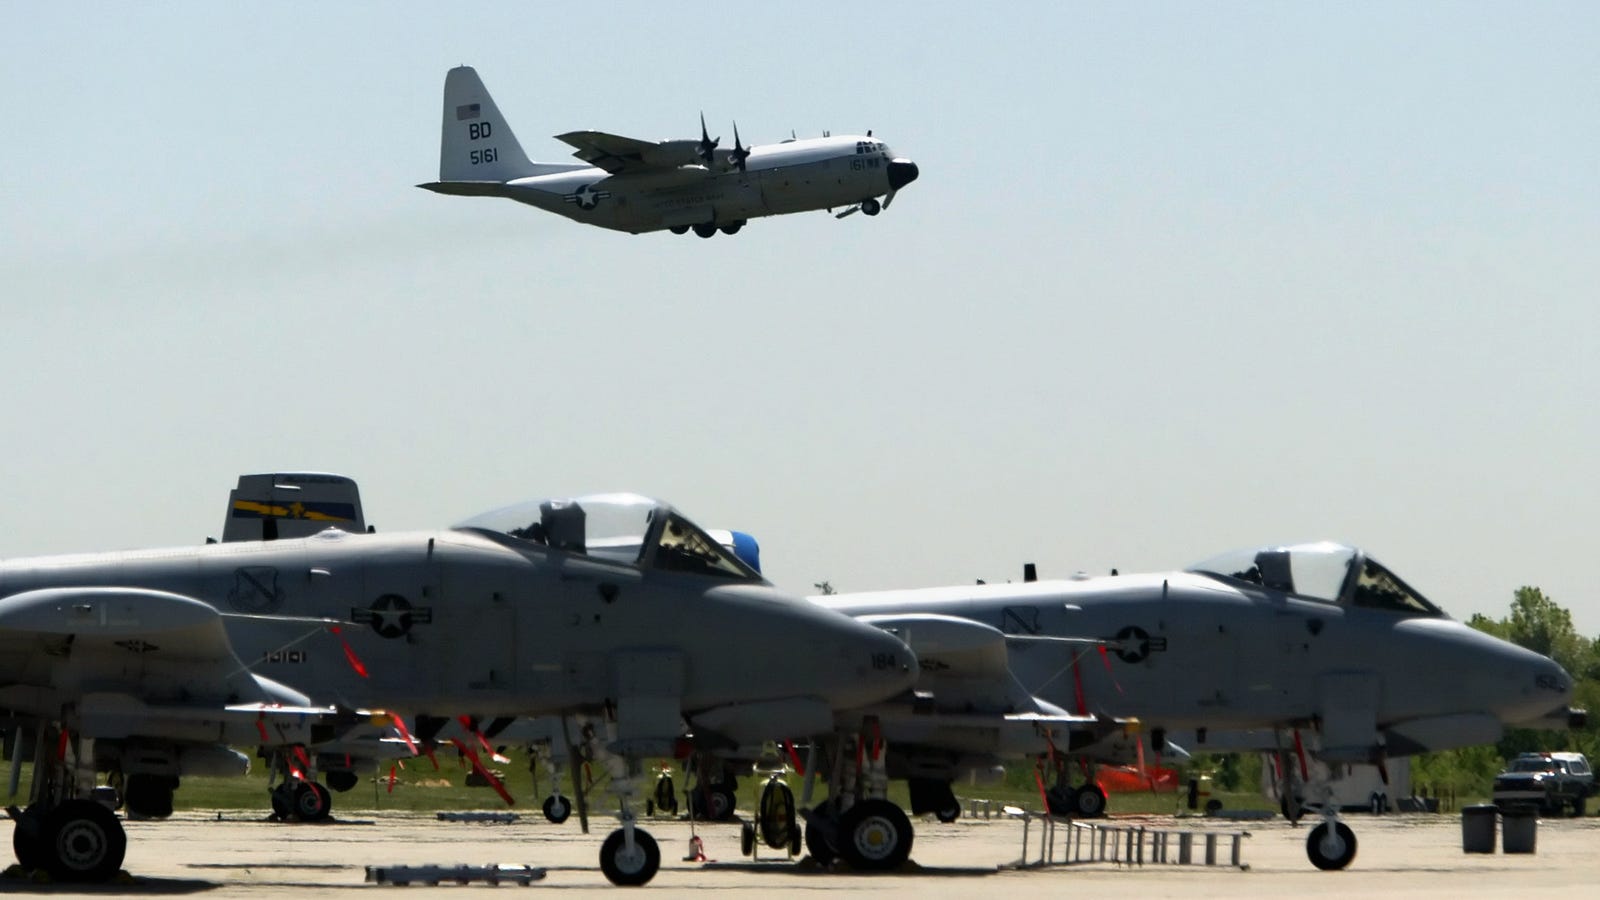 The A 10 Warthog Will Be In Service At Least Until 2021